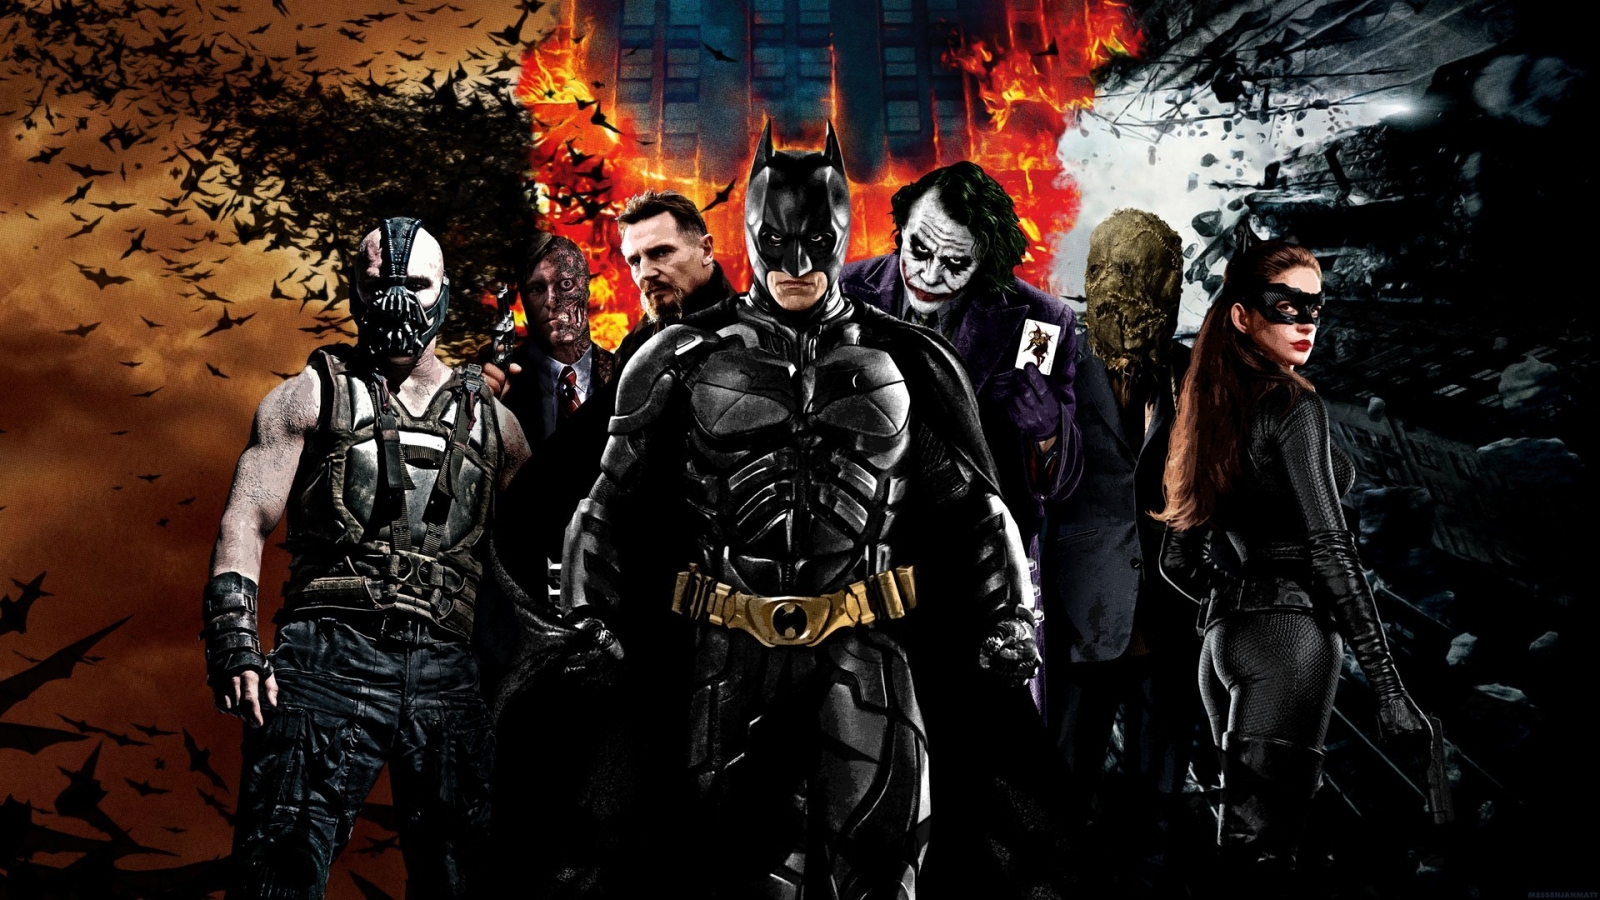 The Dark Knight Characters for 1600 x 900 HDTV resolution